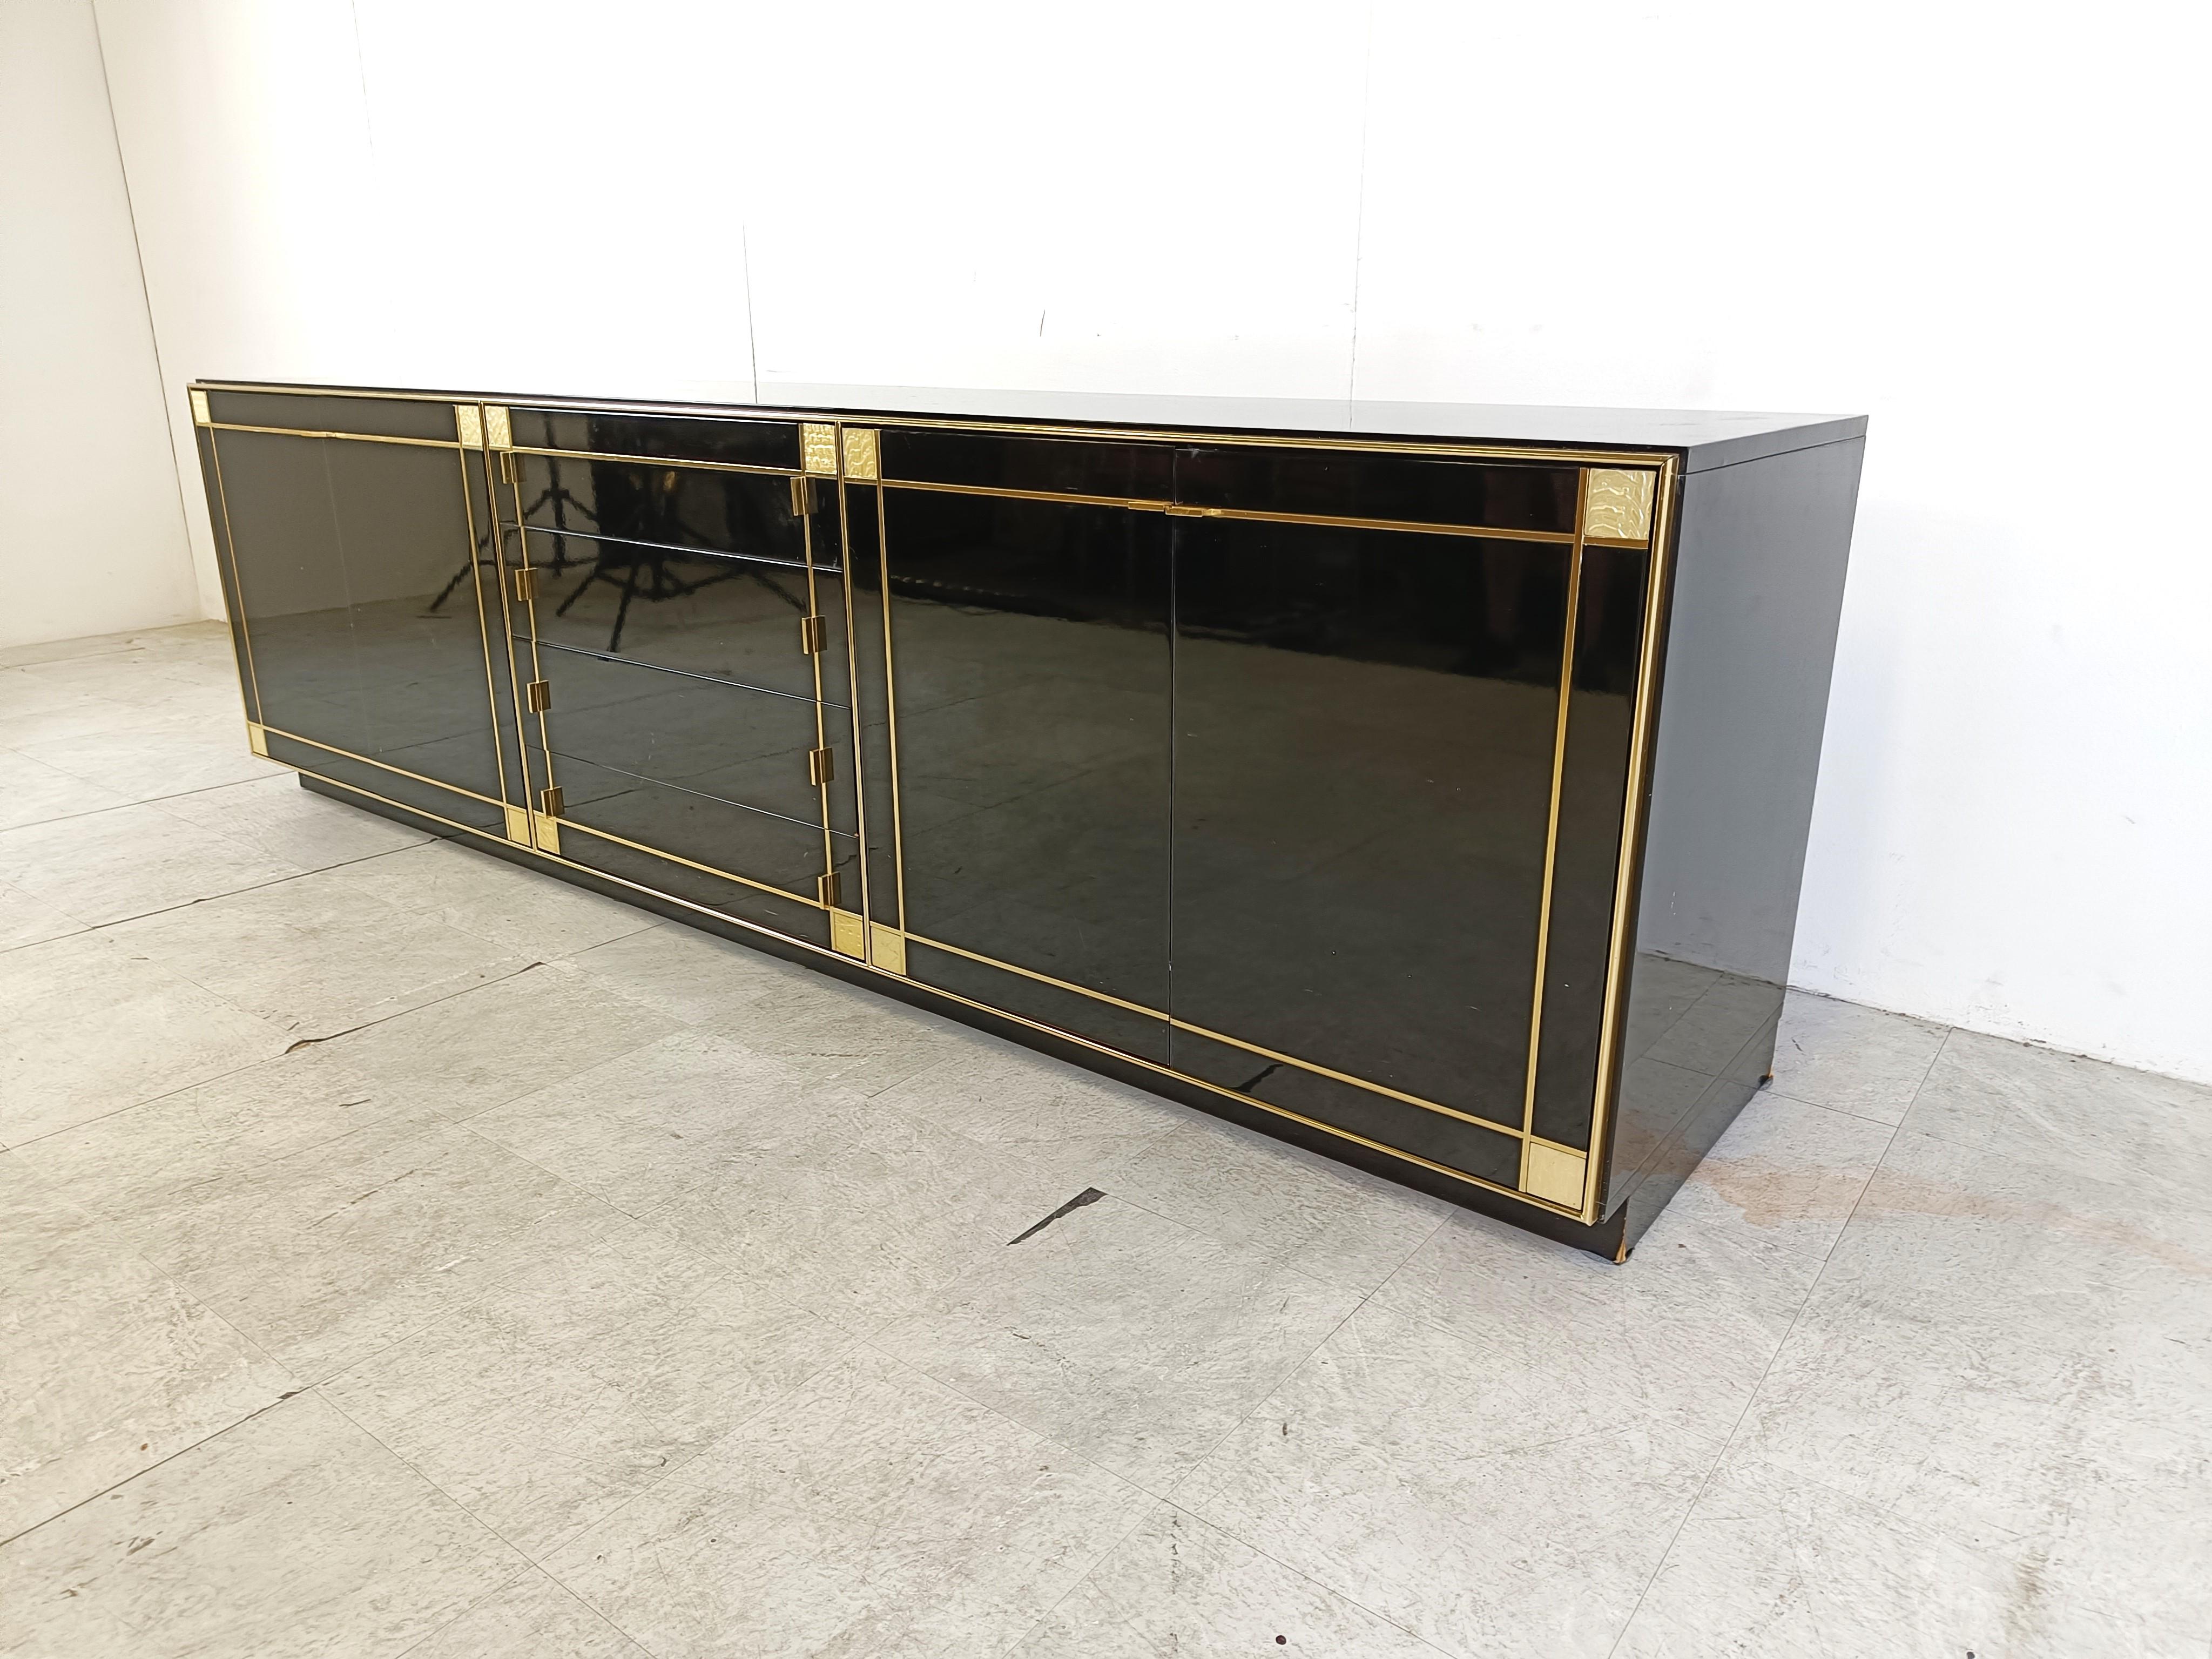 Vintage Black Lacquered Sideboard in Brass by Pierre Cardin, 1980s For Sale 2